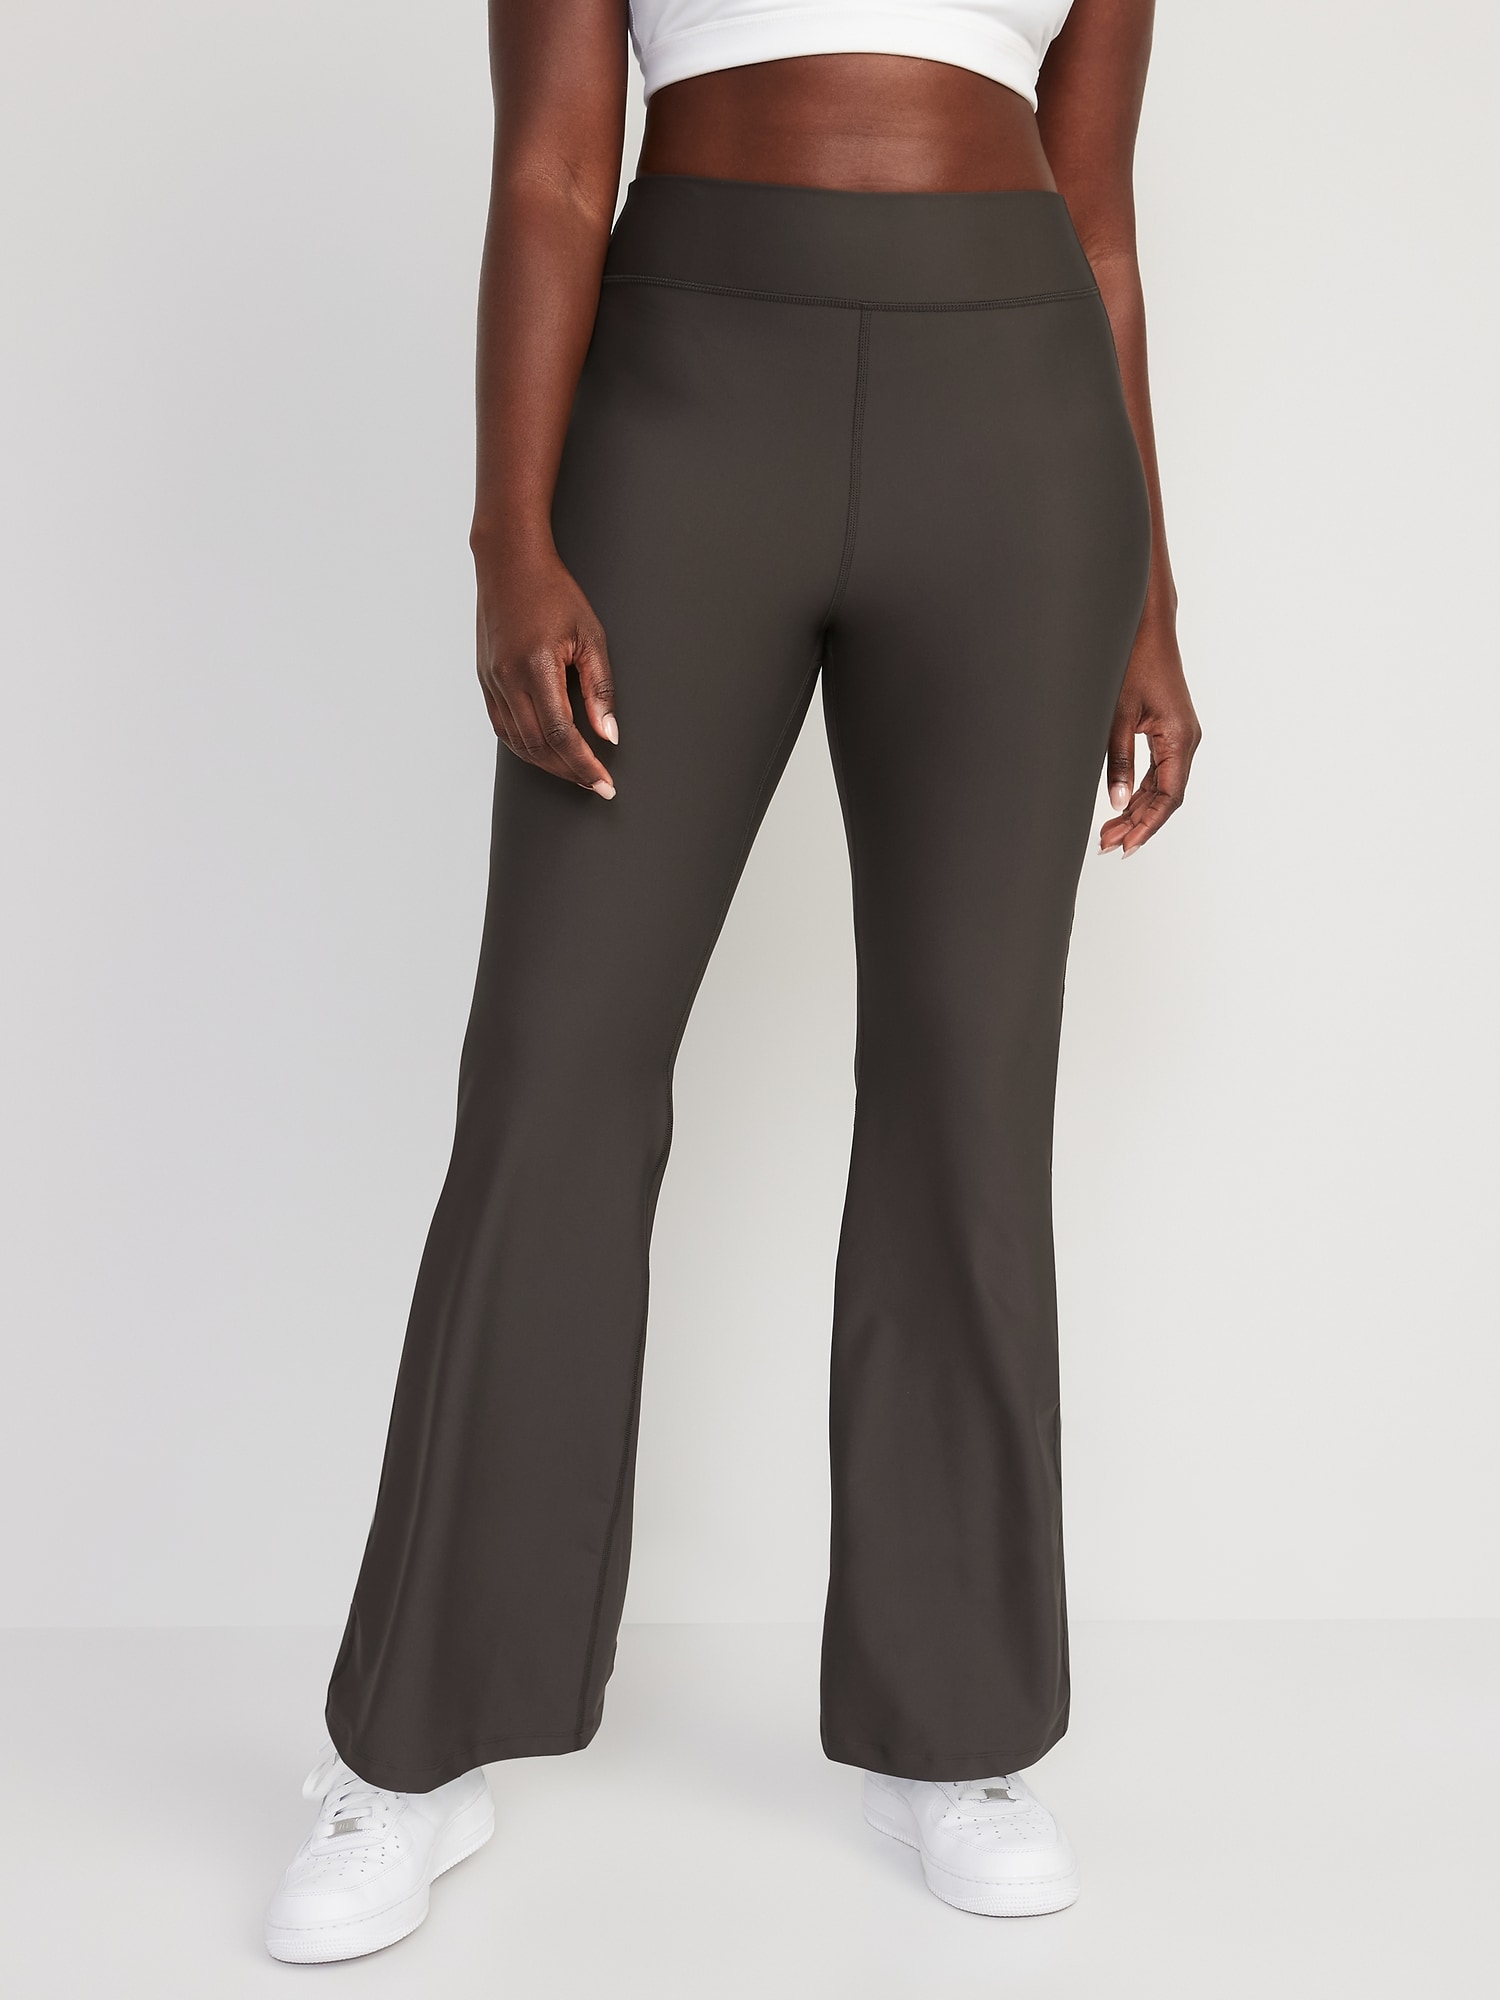 Extra High-Waisted PowerSoft Flare Leggings for Women | Old Navy